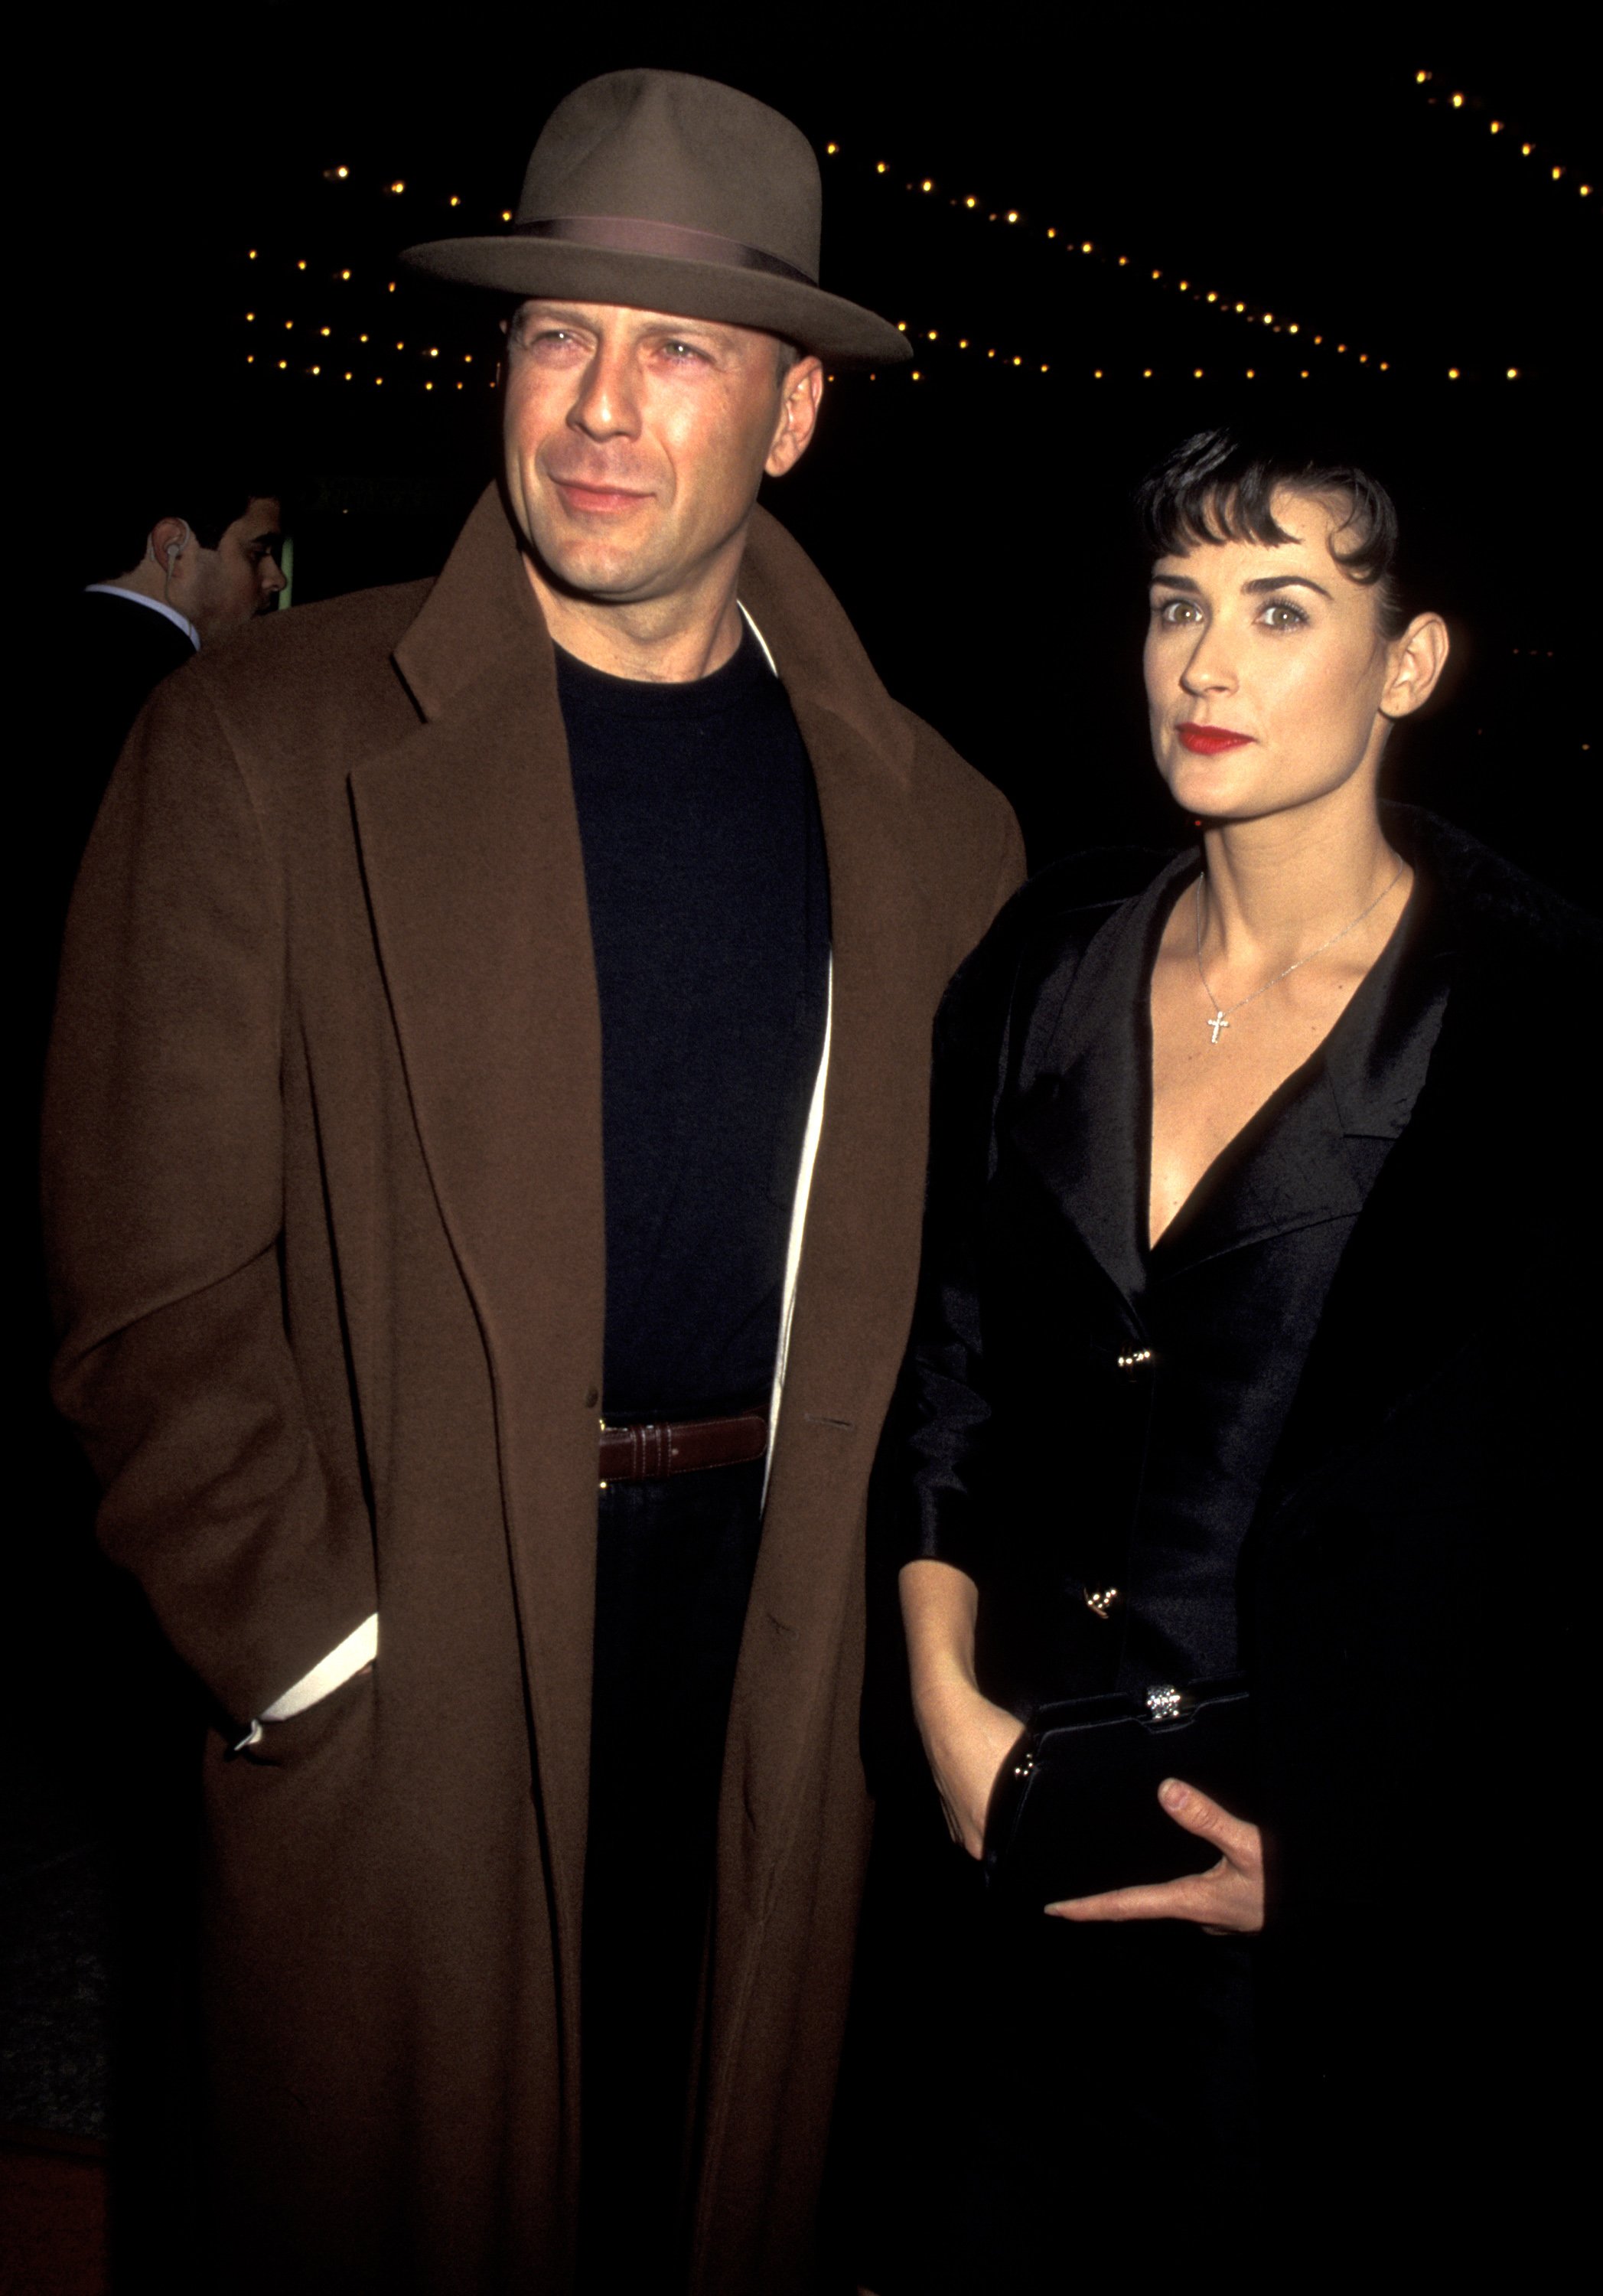 Actors Bruce Willis and Demi Moore attending the Los Angeles premiere of "The Juror."  / Source: Getty Images